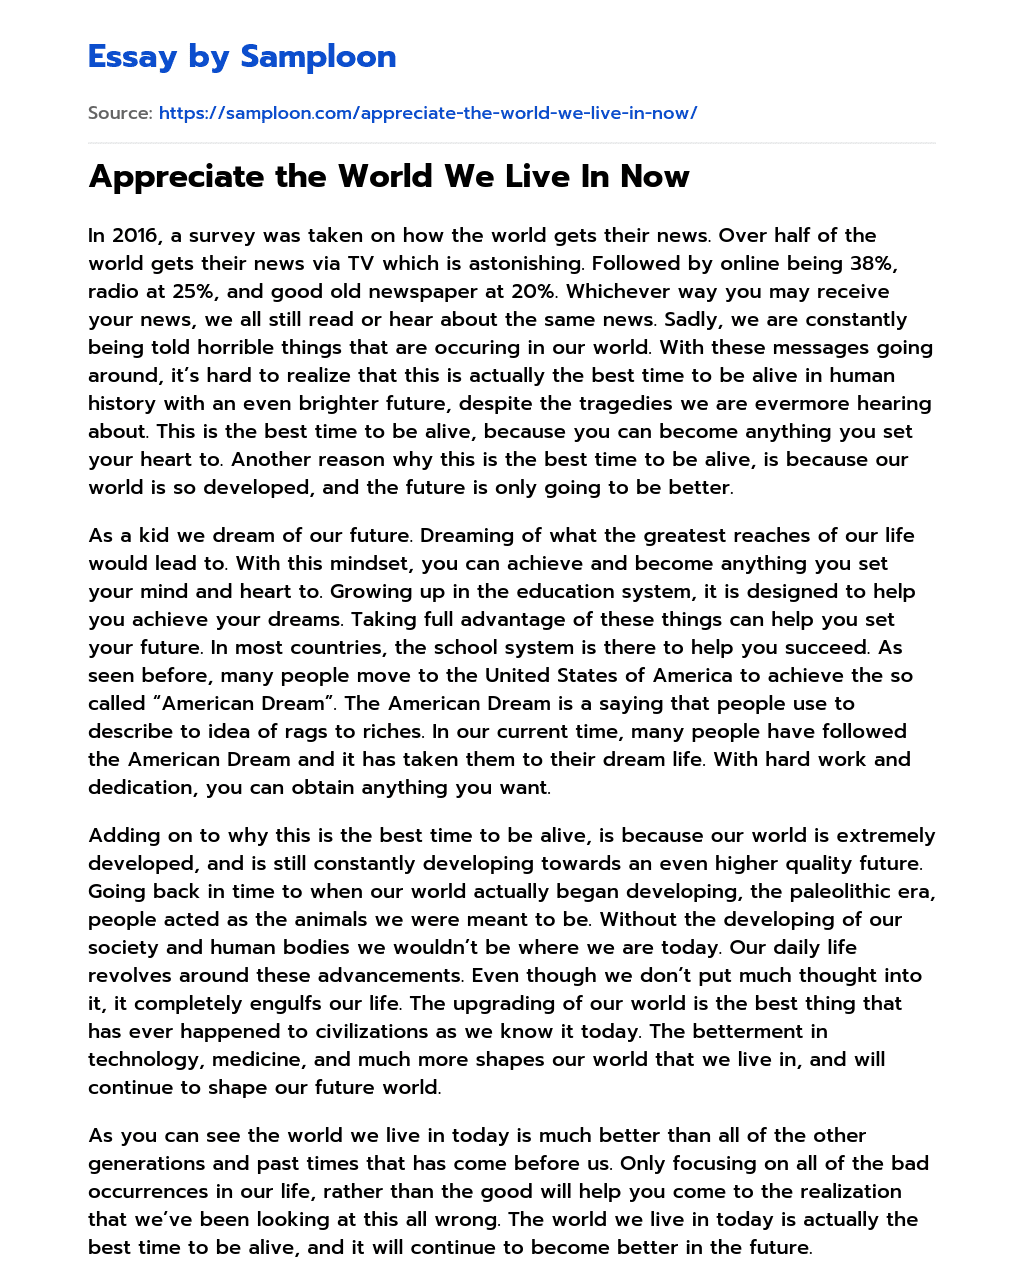 Appreciate the World We Live In Now essay